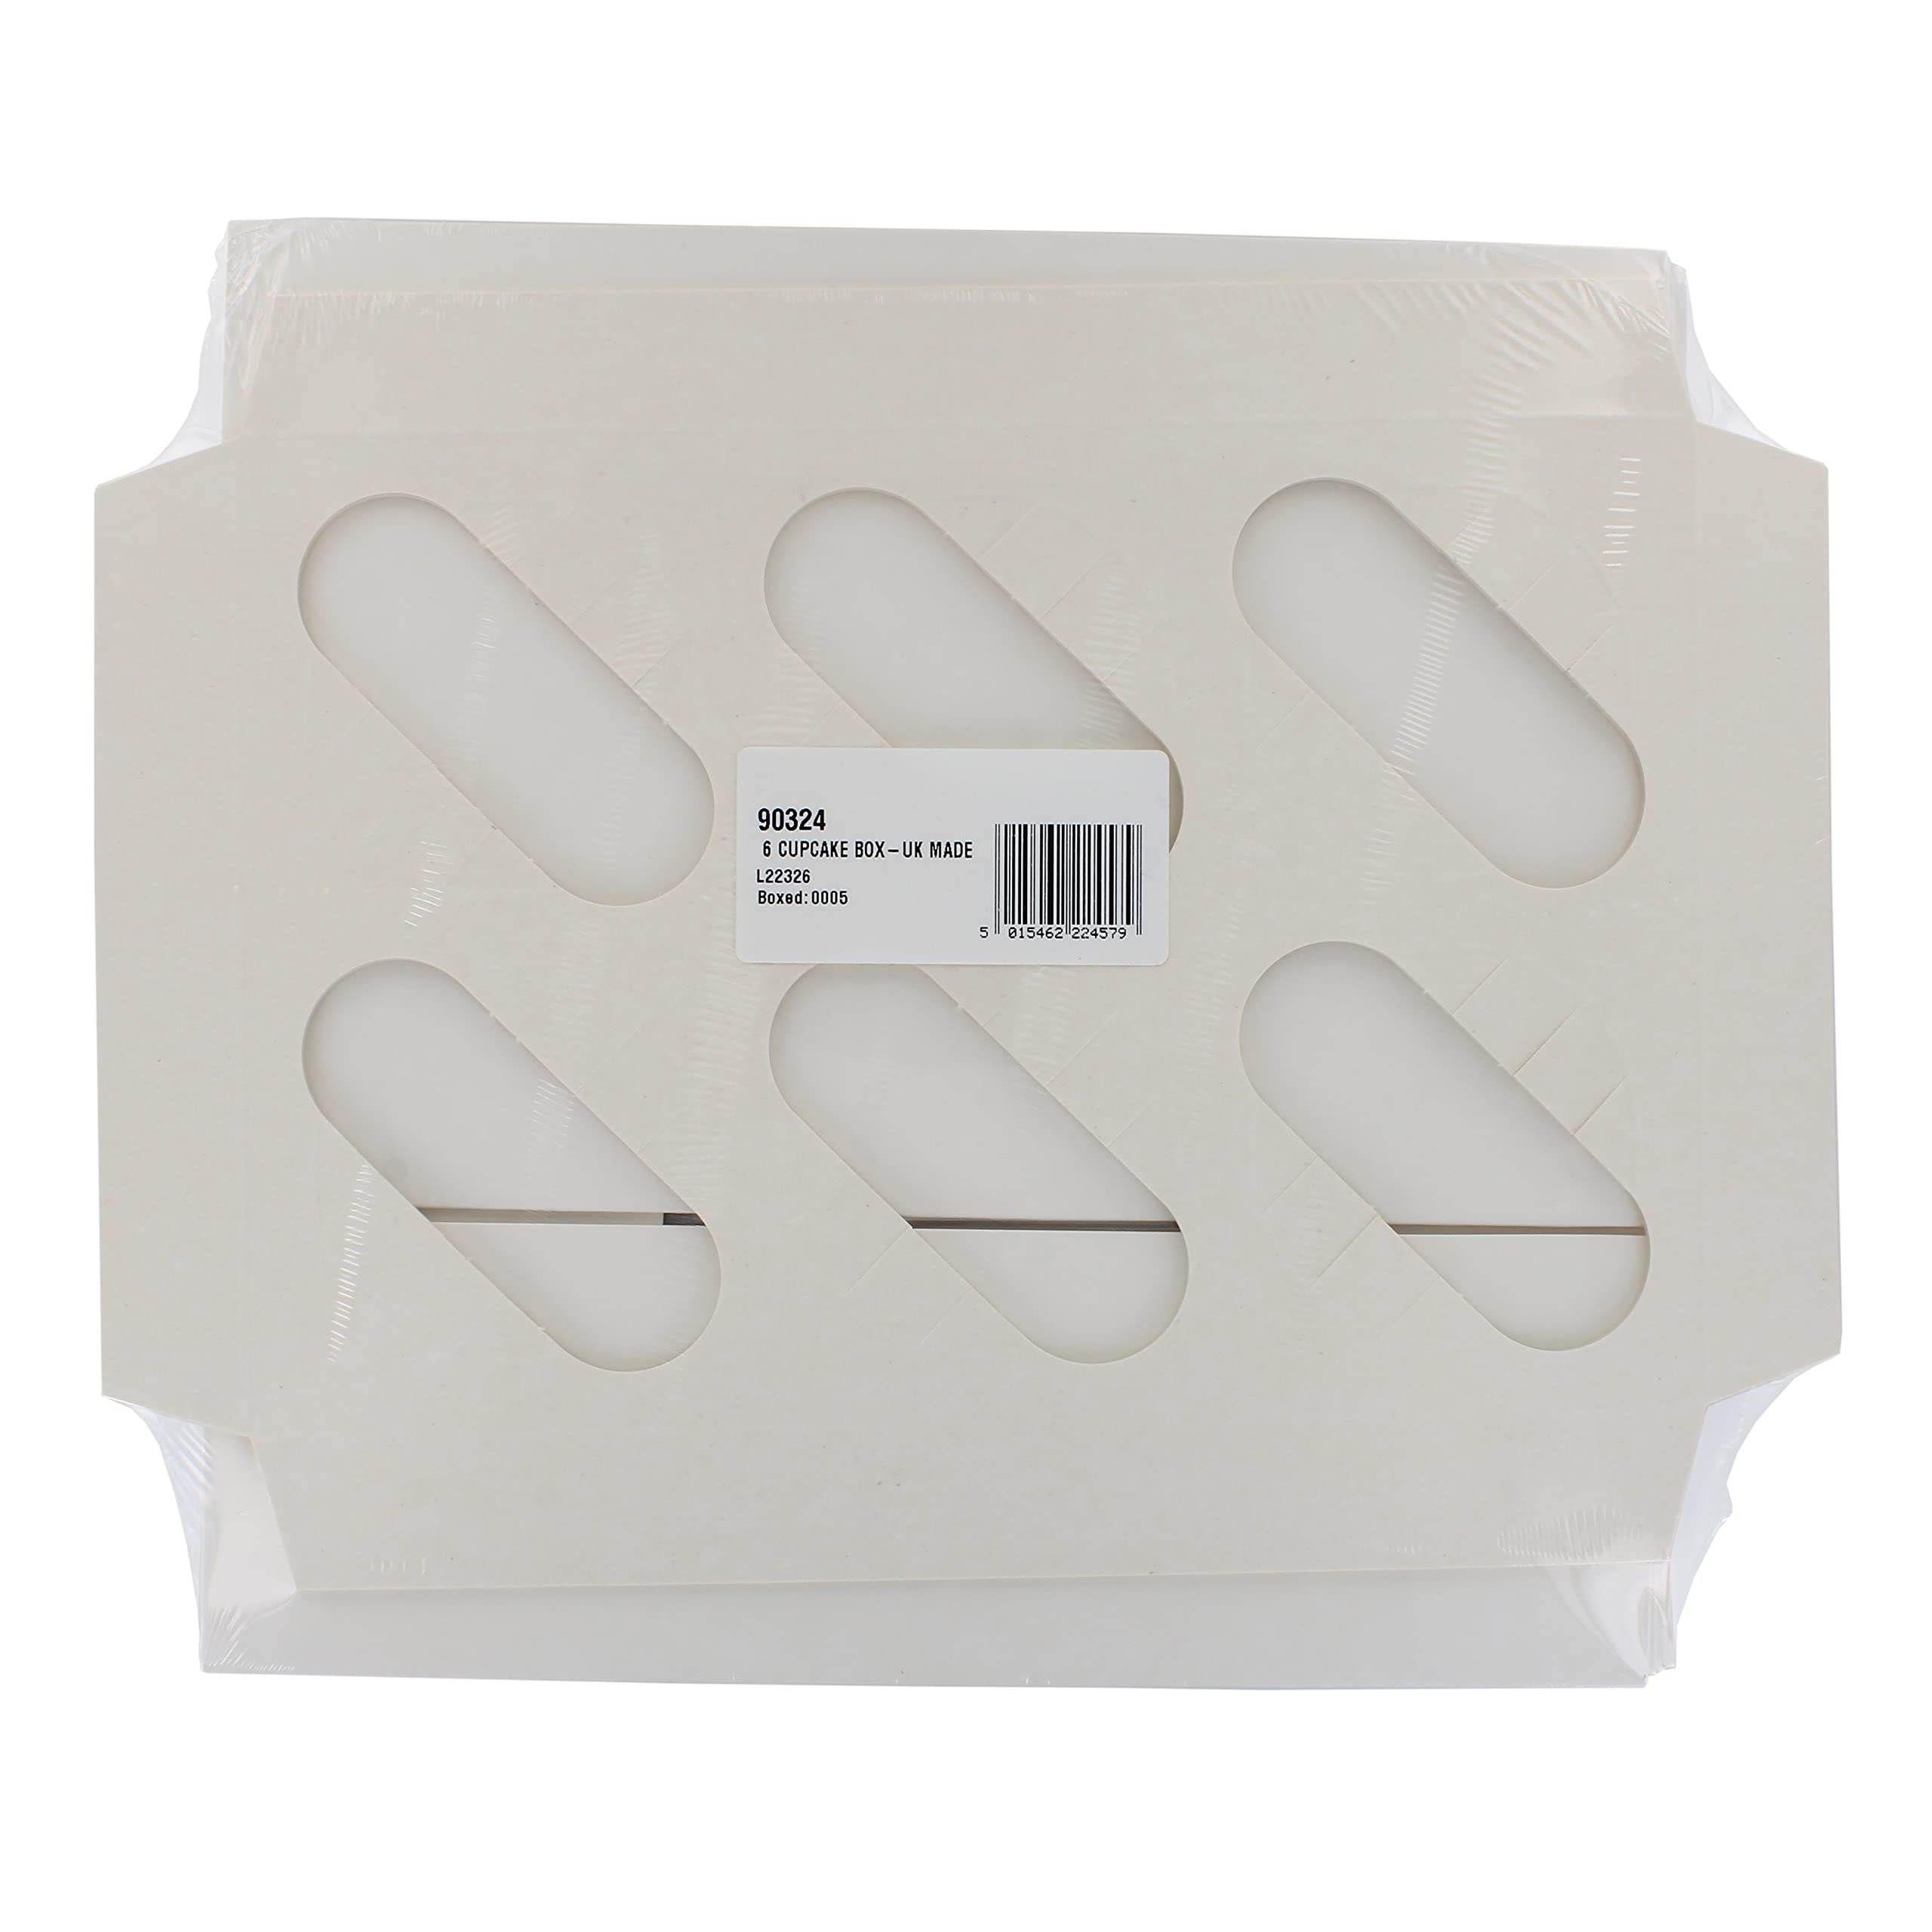 Culpitt 6 Hole Cupcake Box, 5 Pack, White Cupcake Boxes For Carrying And Displaying Tasty Muffins, Fairy Cakes, And Treats. Made in the UK